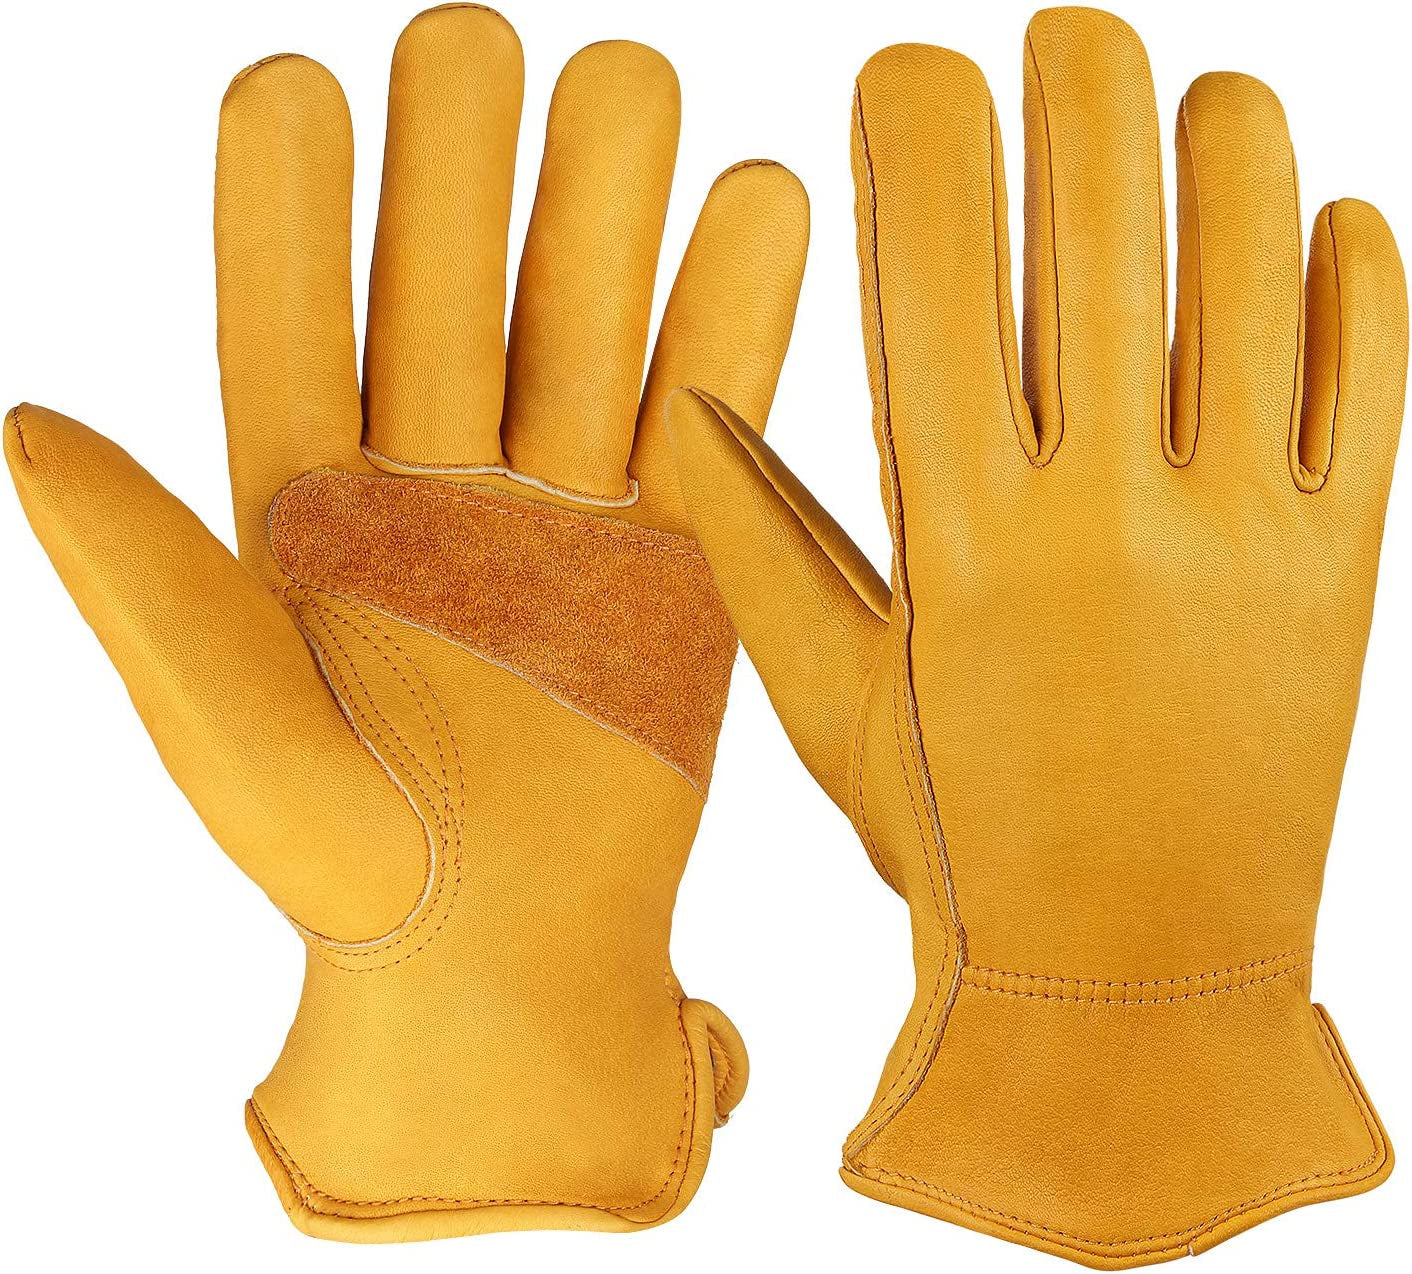 OZERO, Leather Work Gloves Stretchable Flex Grip Water Resistant Tough Cowhide Gardening Glove for Men Women Yellow